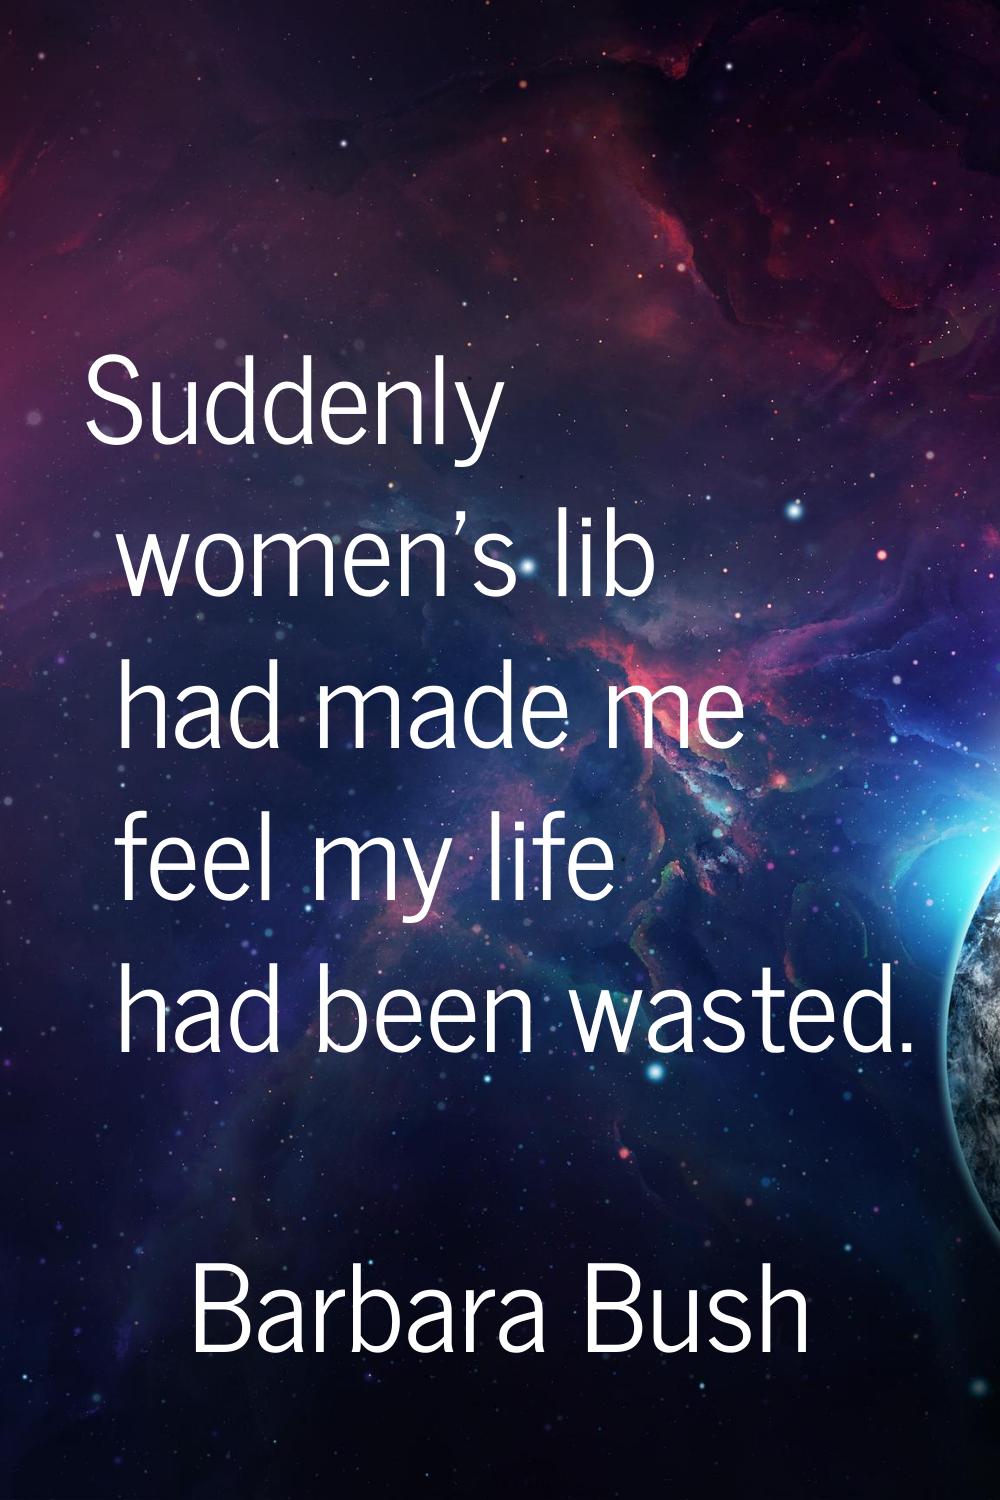 Suddenly women's lib had made me feel my life had been wasted.